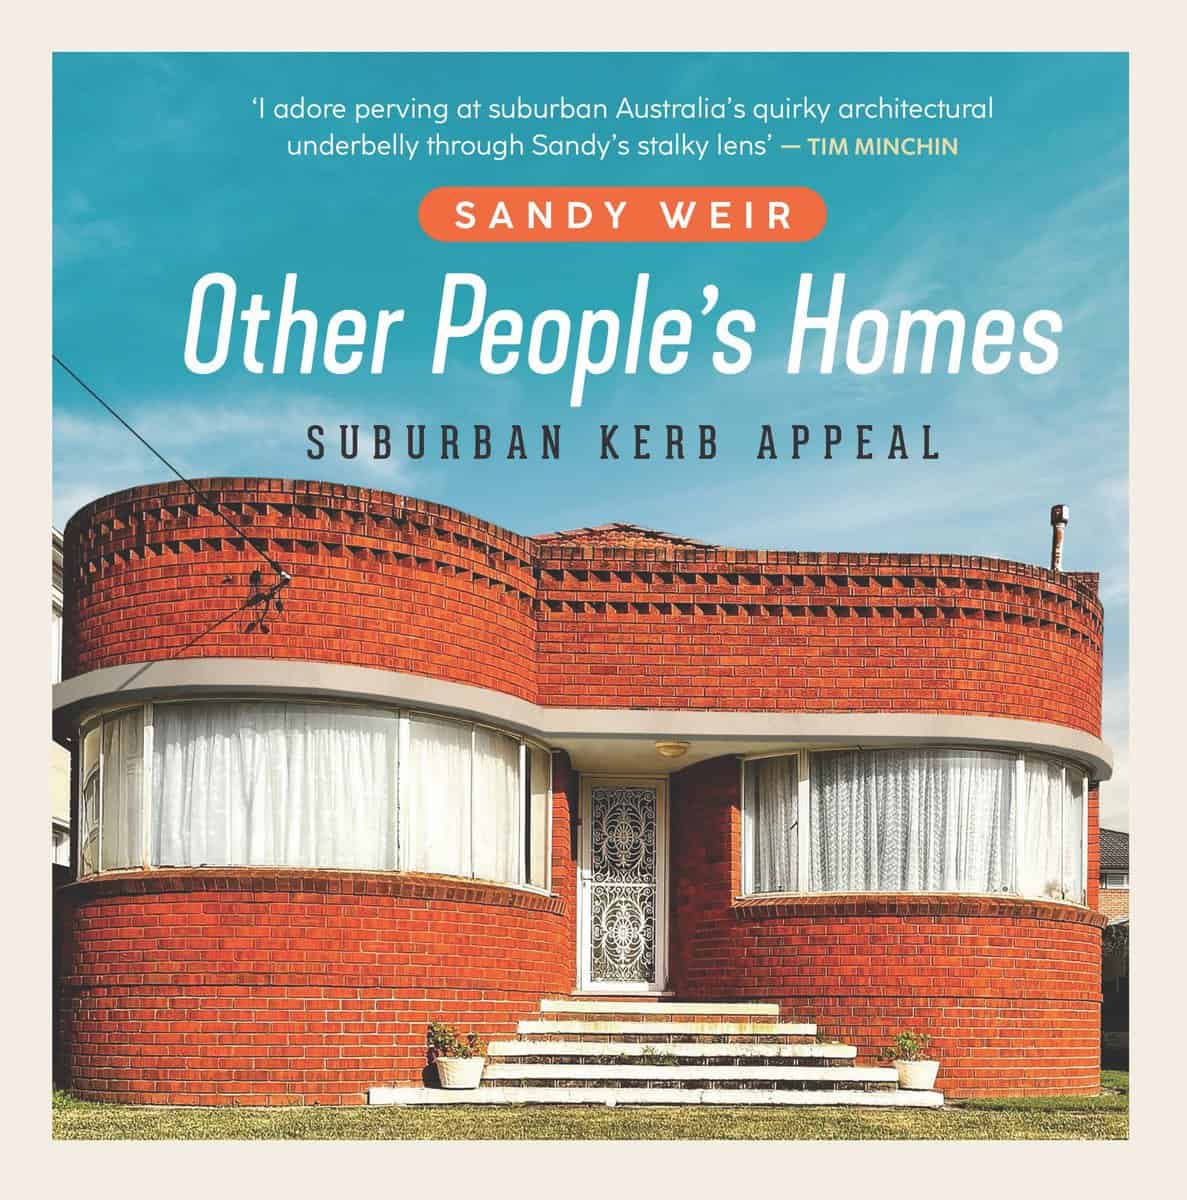 Other People's Homes by Sandy Weir